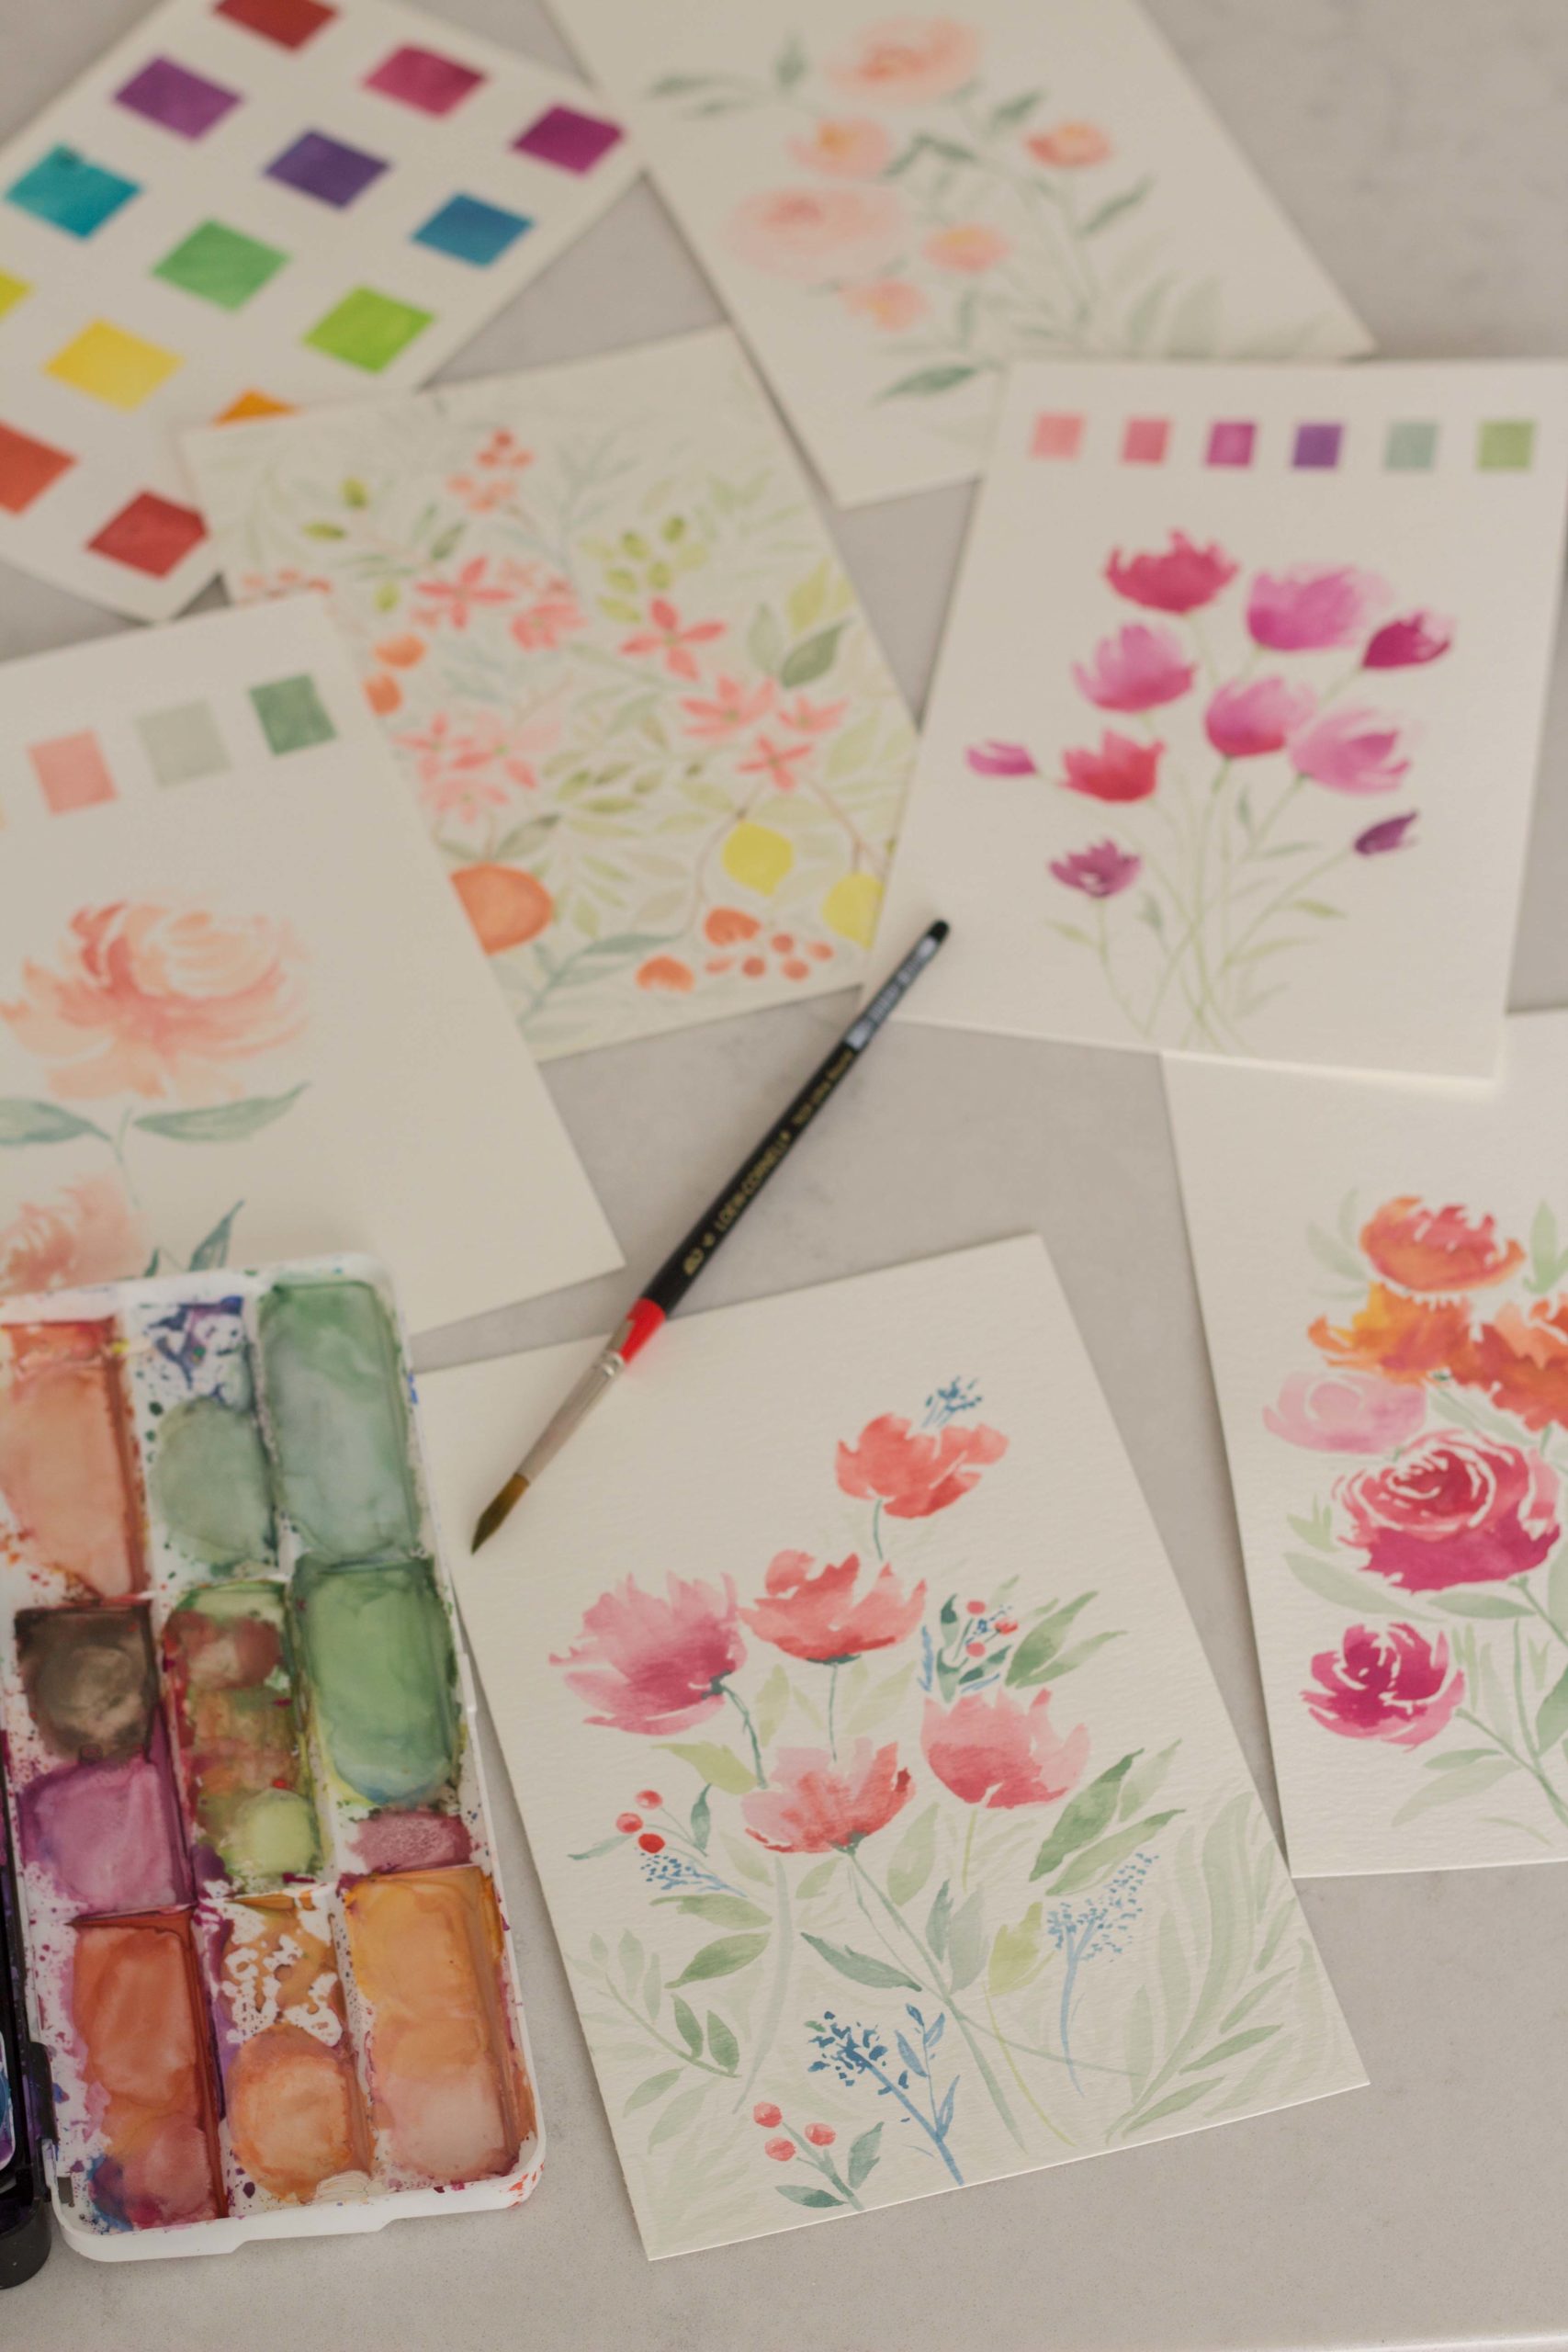 Learn watercolor basics in 7 days